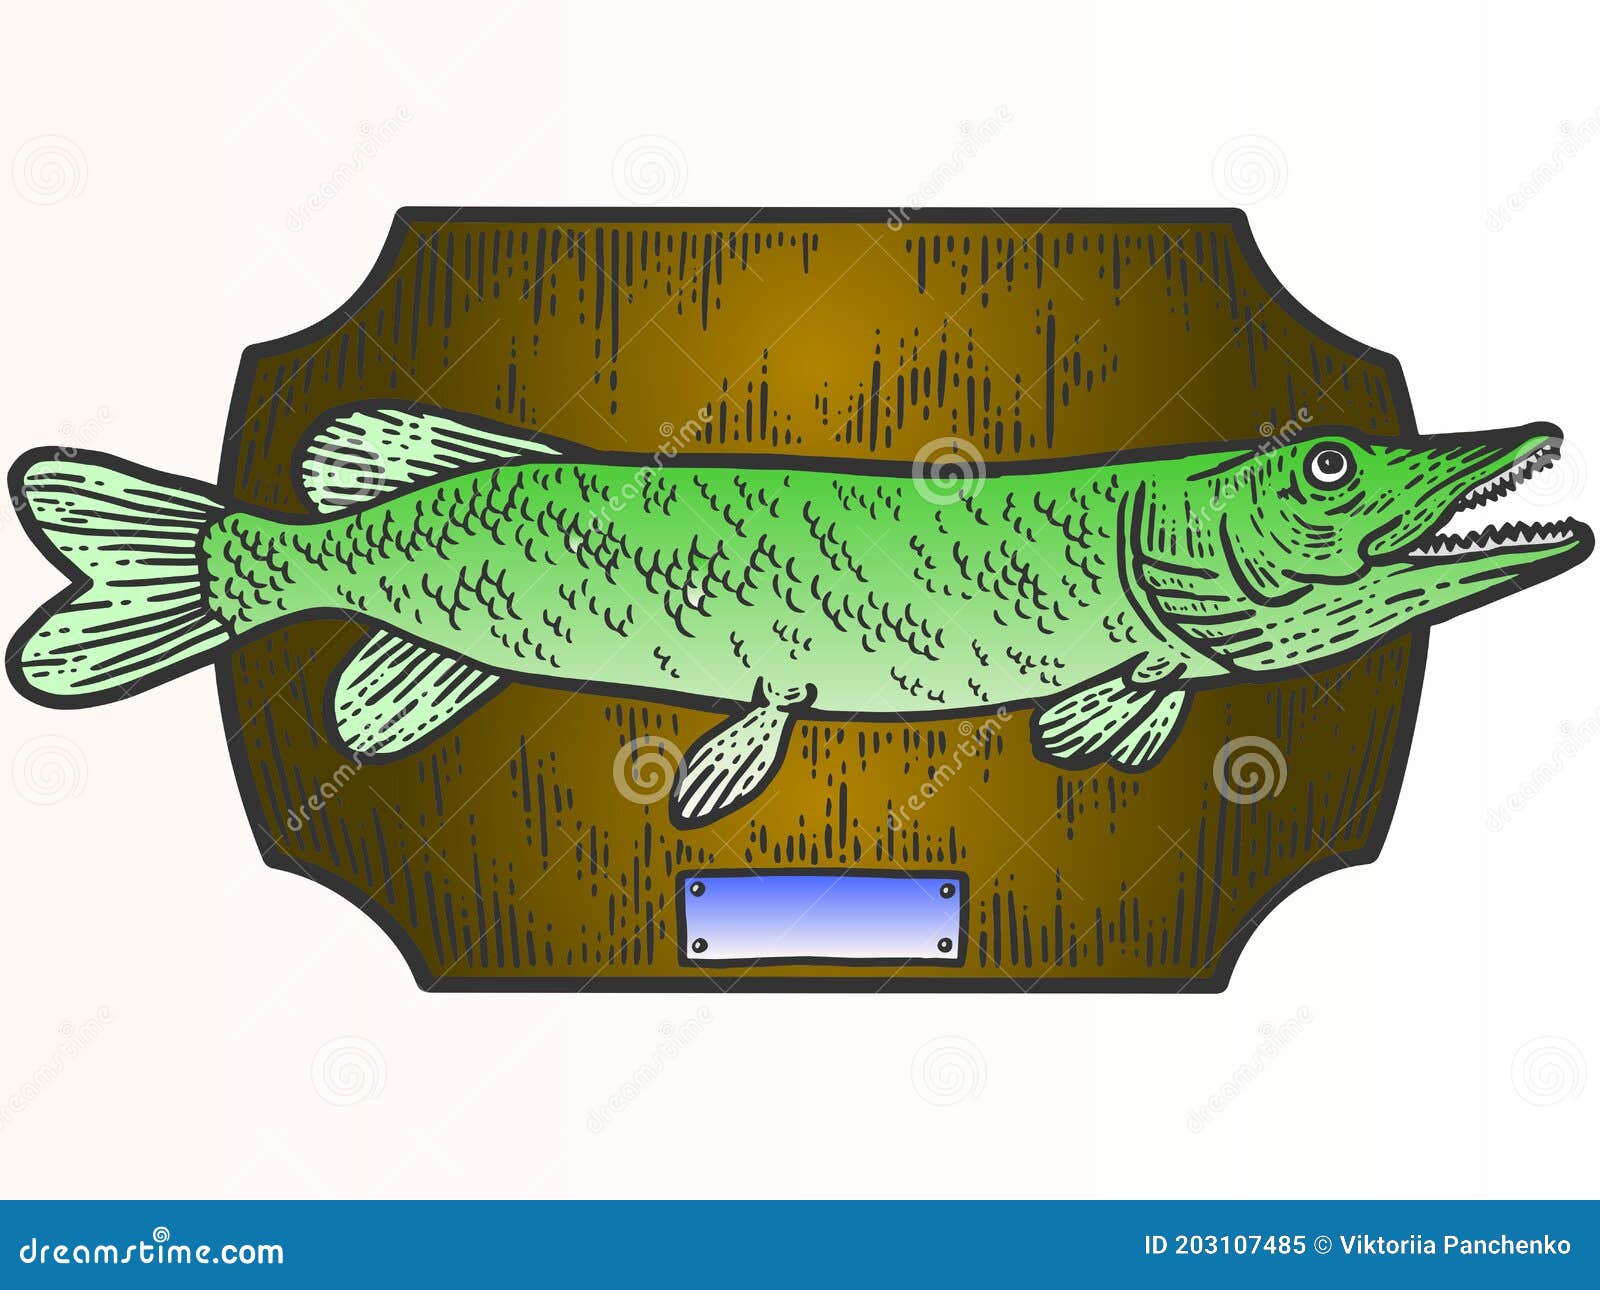 Fishing Trophy Stuffed Fish, Northern Pike. Apparel Print Design. Scratch  Board Imitation. Color Hand Drawn Image Stock Vector - Illustration of  clipart, background: 203107485